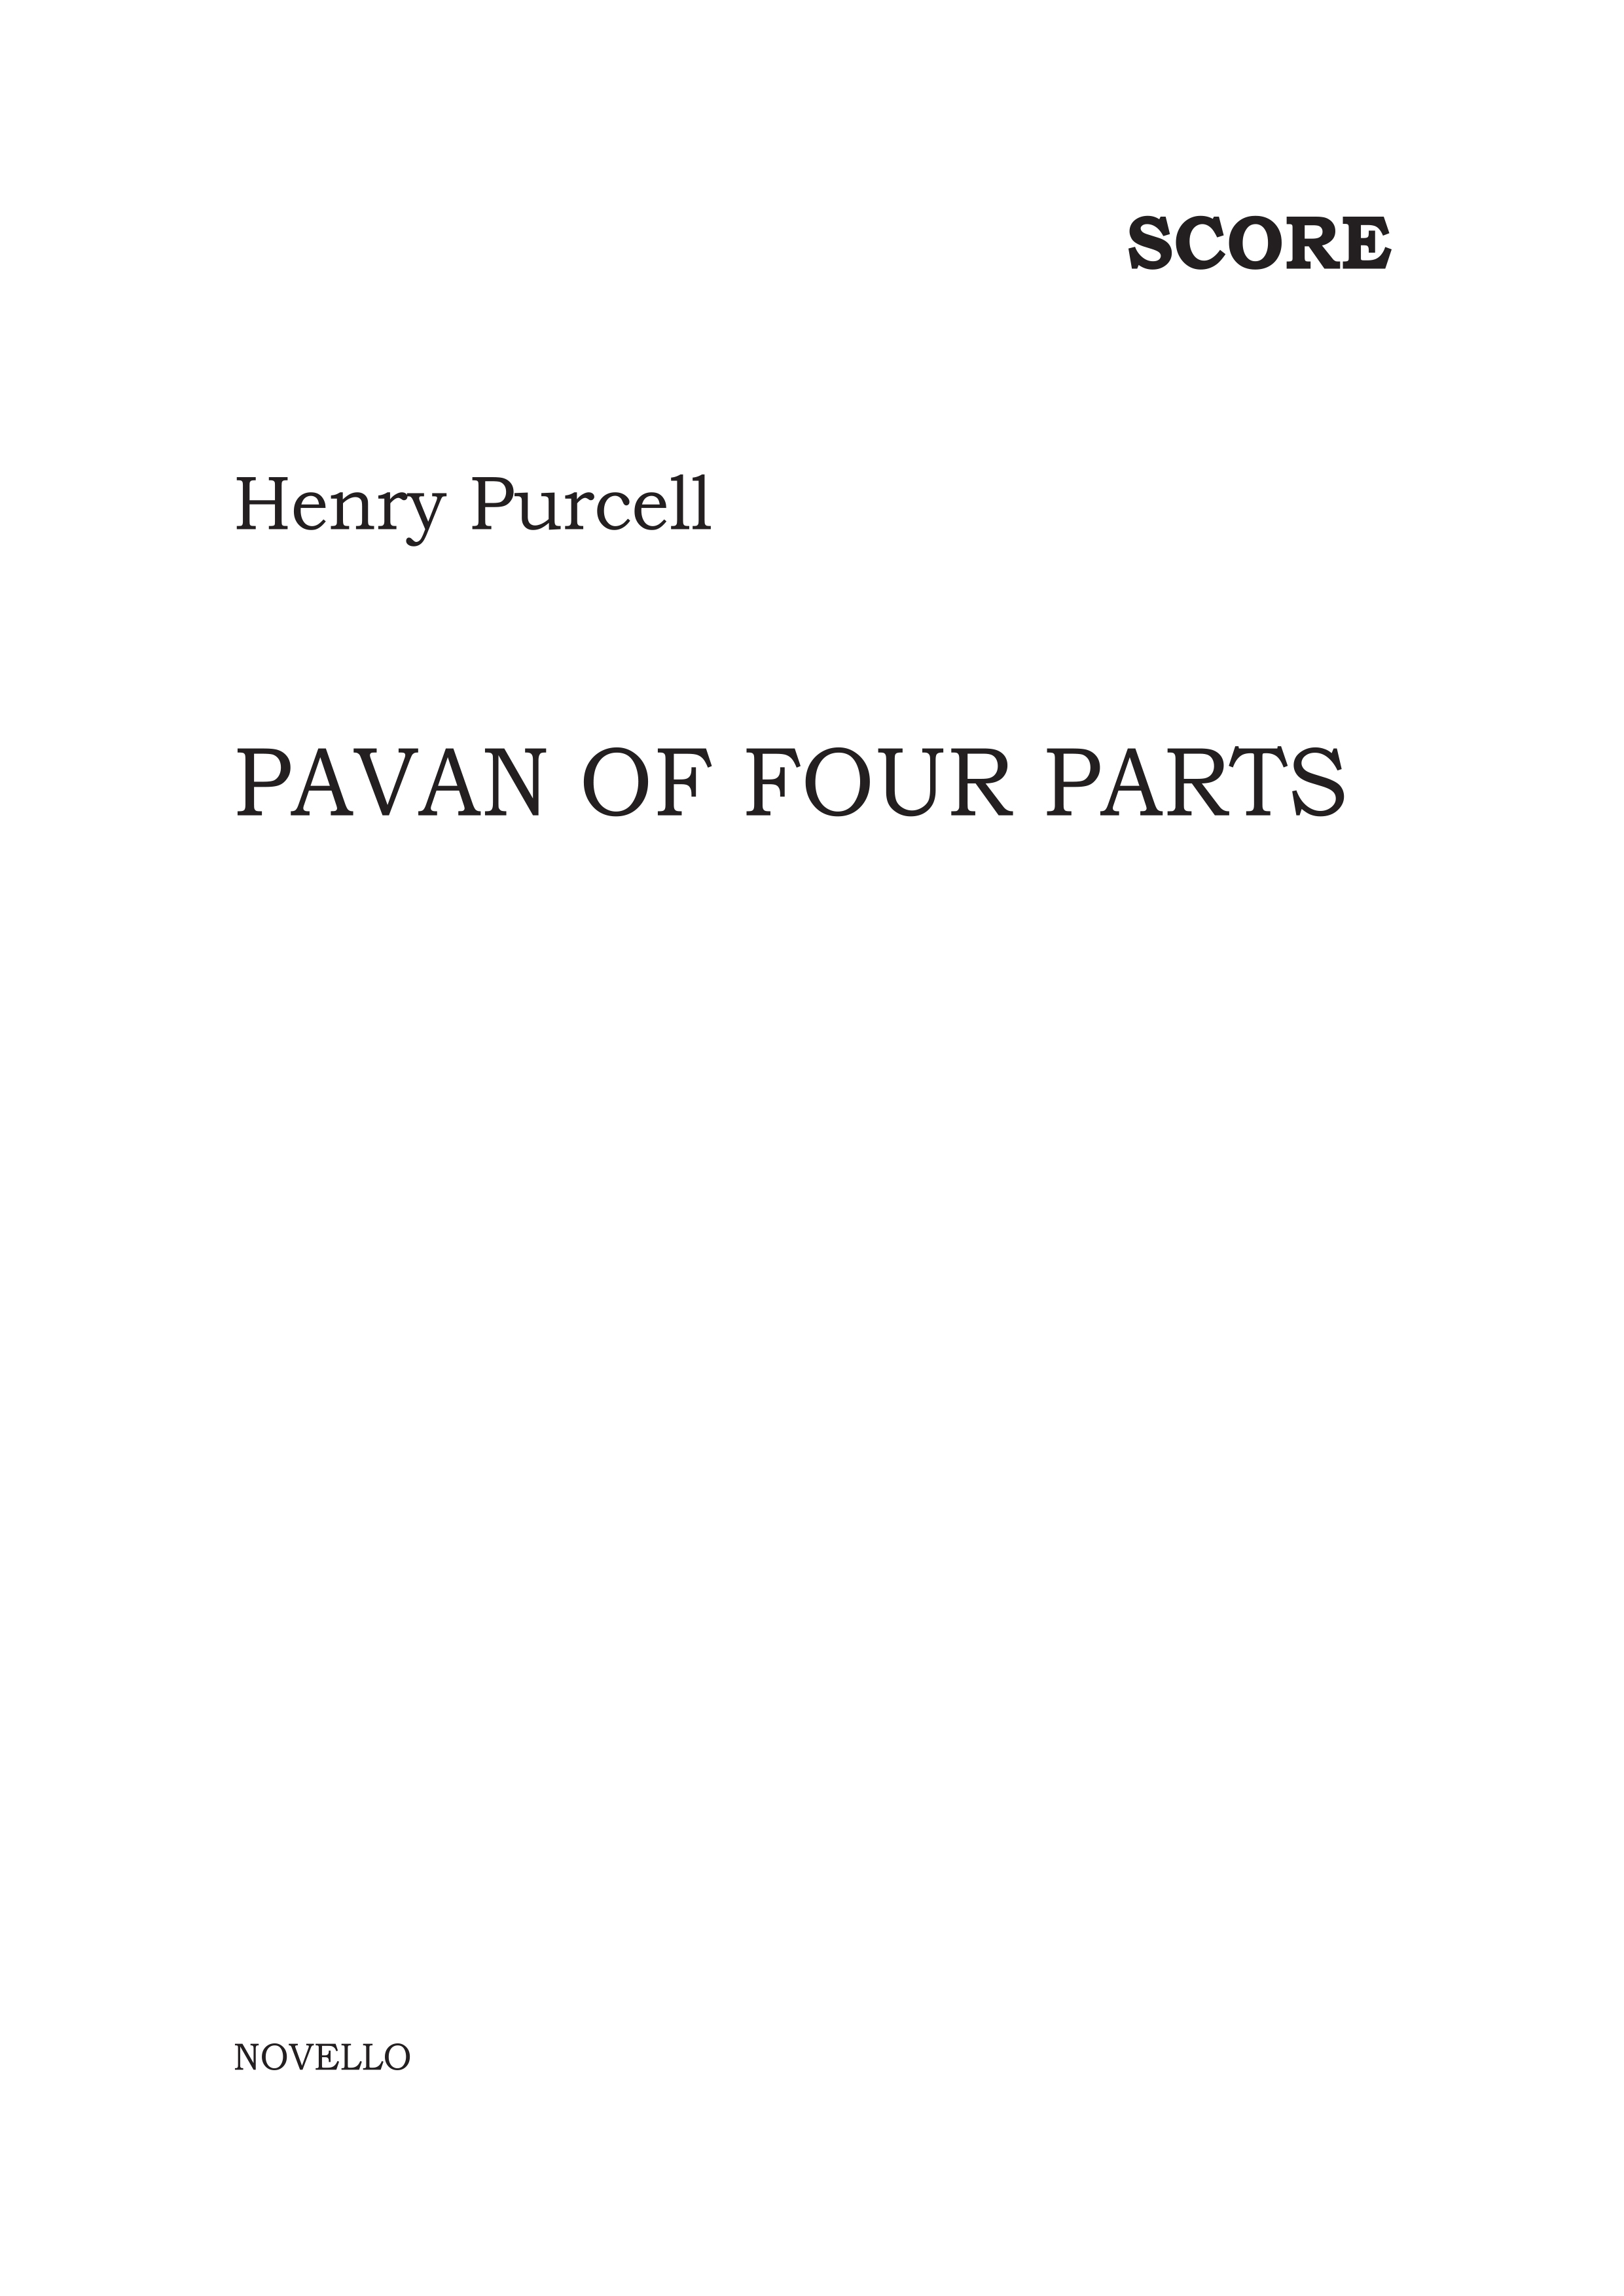 Henry Purcell: Pavan Of Four Voices: String Ensemble: Score and Parts